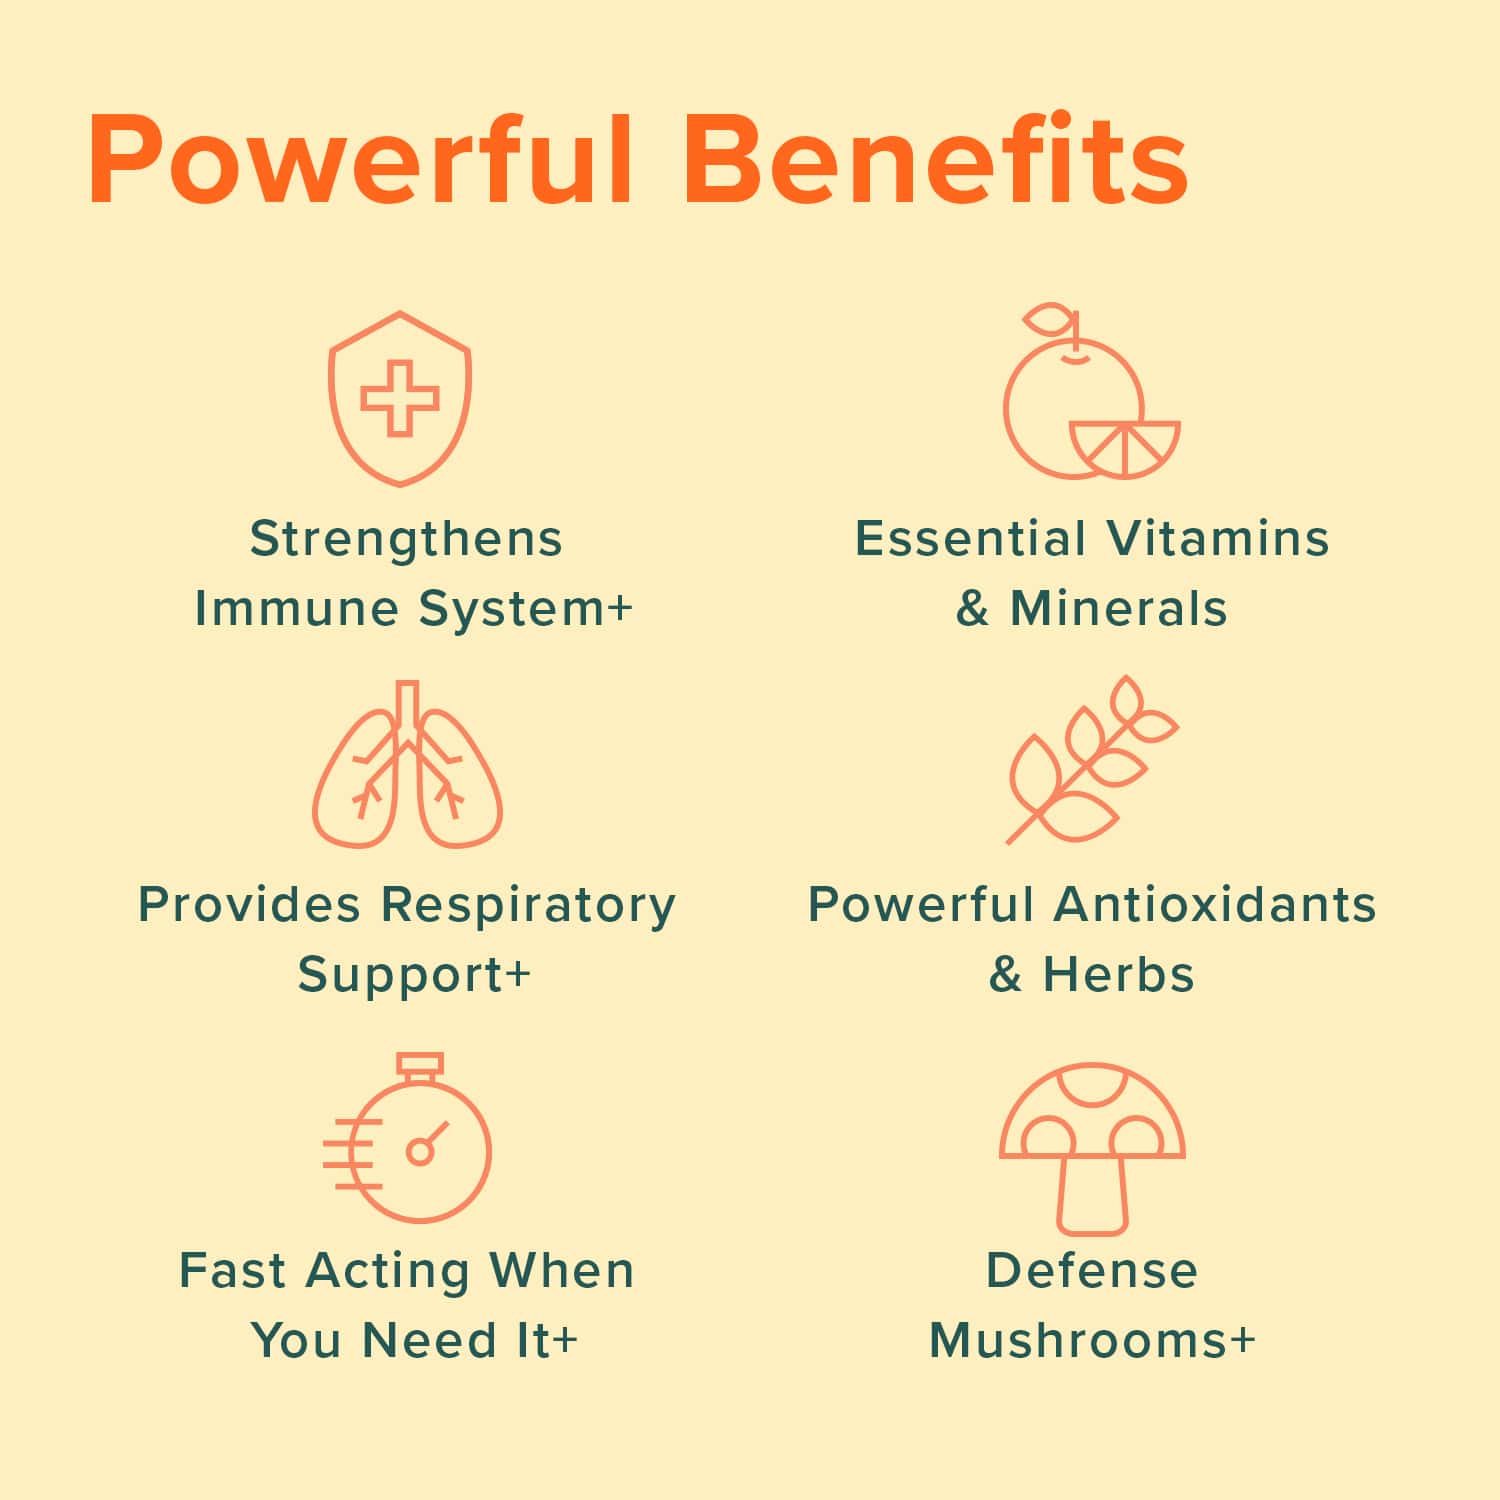 Powerful Benefits for Immune Support